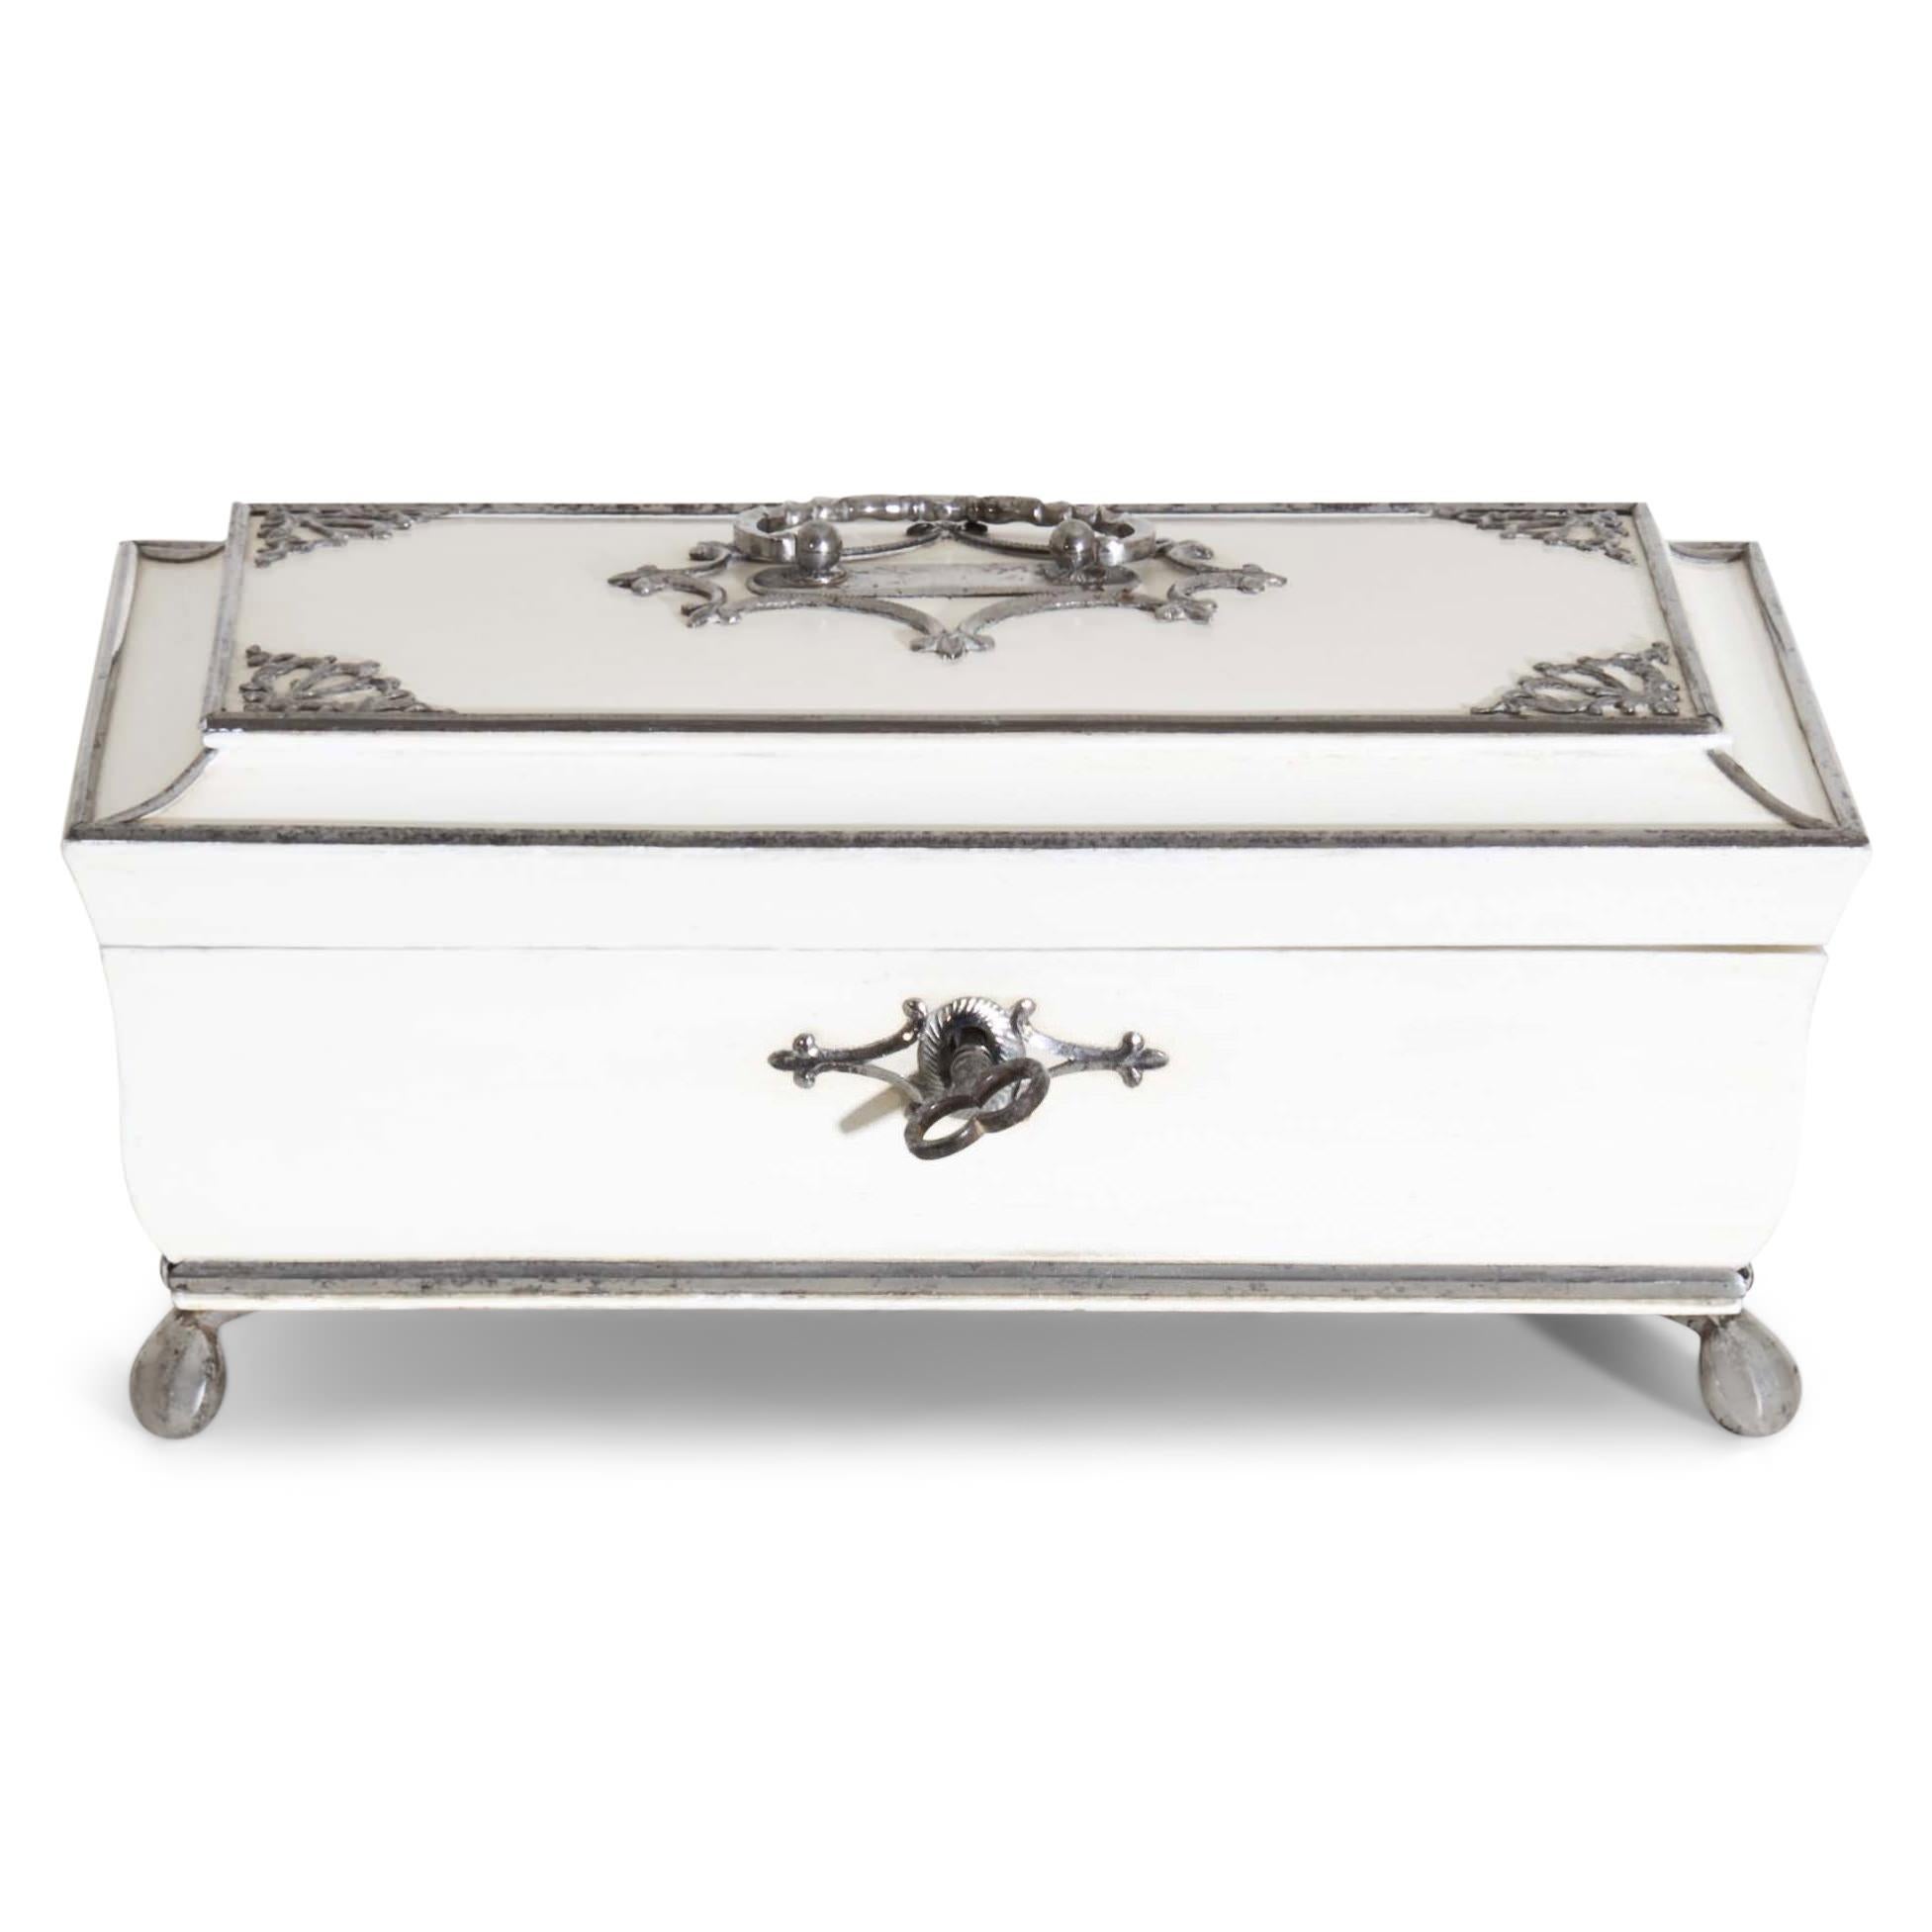 White lidded box standing on small spherical feet with trapezoidal body and lid with a groove. The fittings are silver plated. Key available. Interior veneered in cherry.